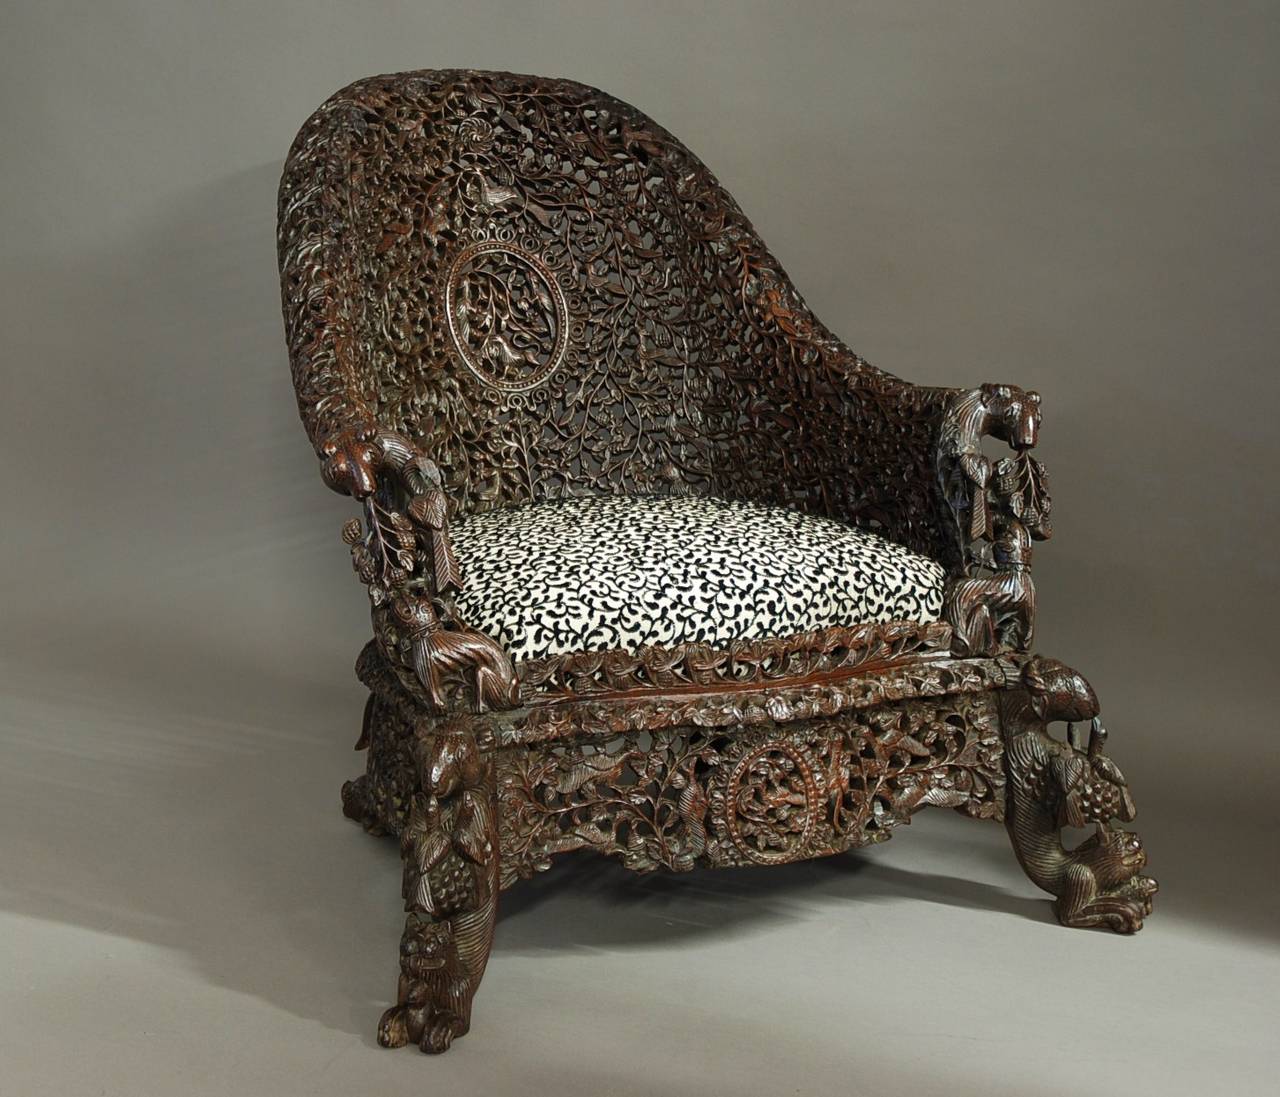 A highly decorative mid 19th century profusely carved hardwood armchair from the Bombay area of India of superb quality.

This chair consists of a profusely carved and pierced arched back depicting animals and foliage with a central oval panel